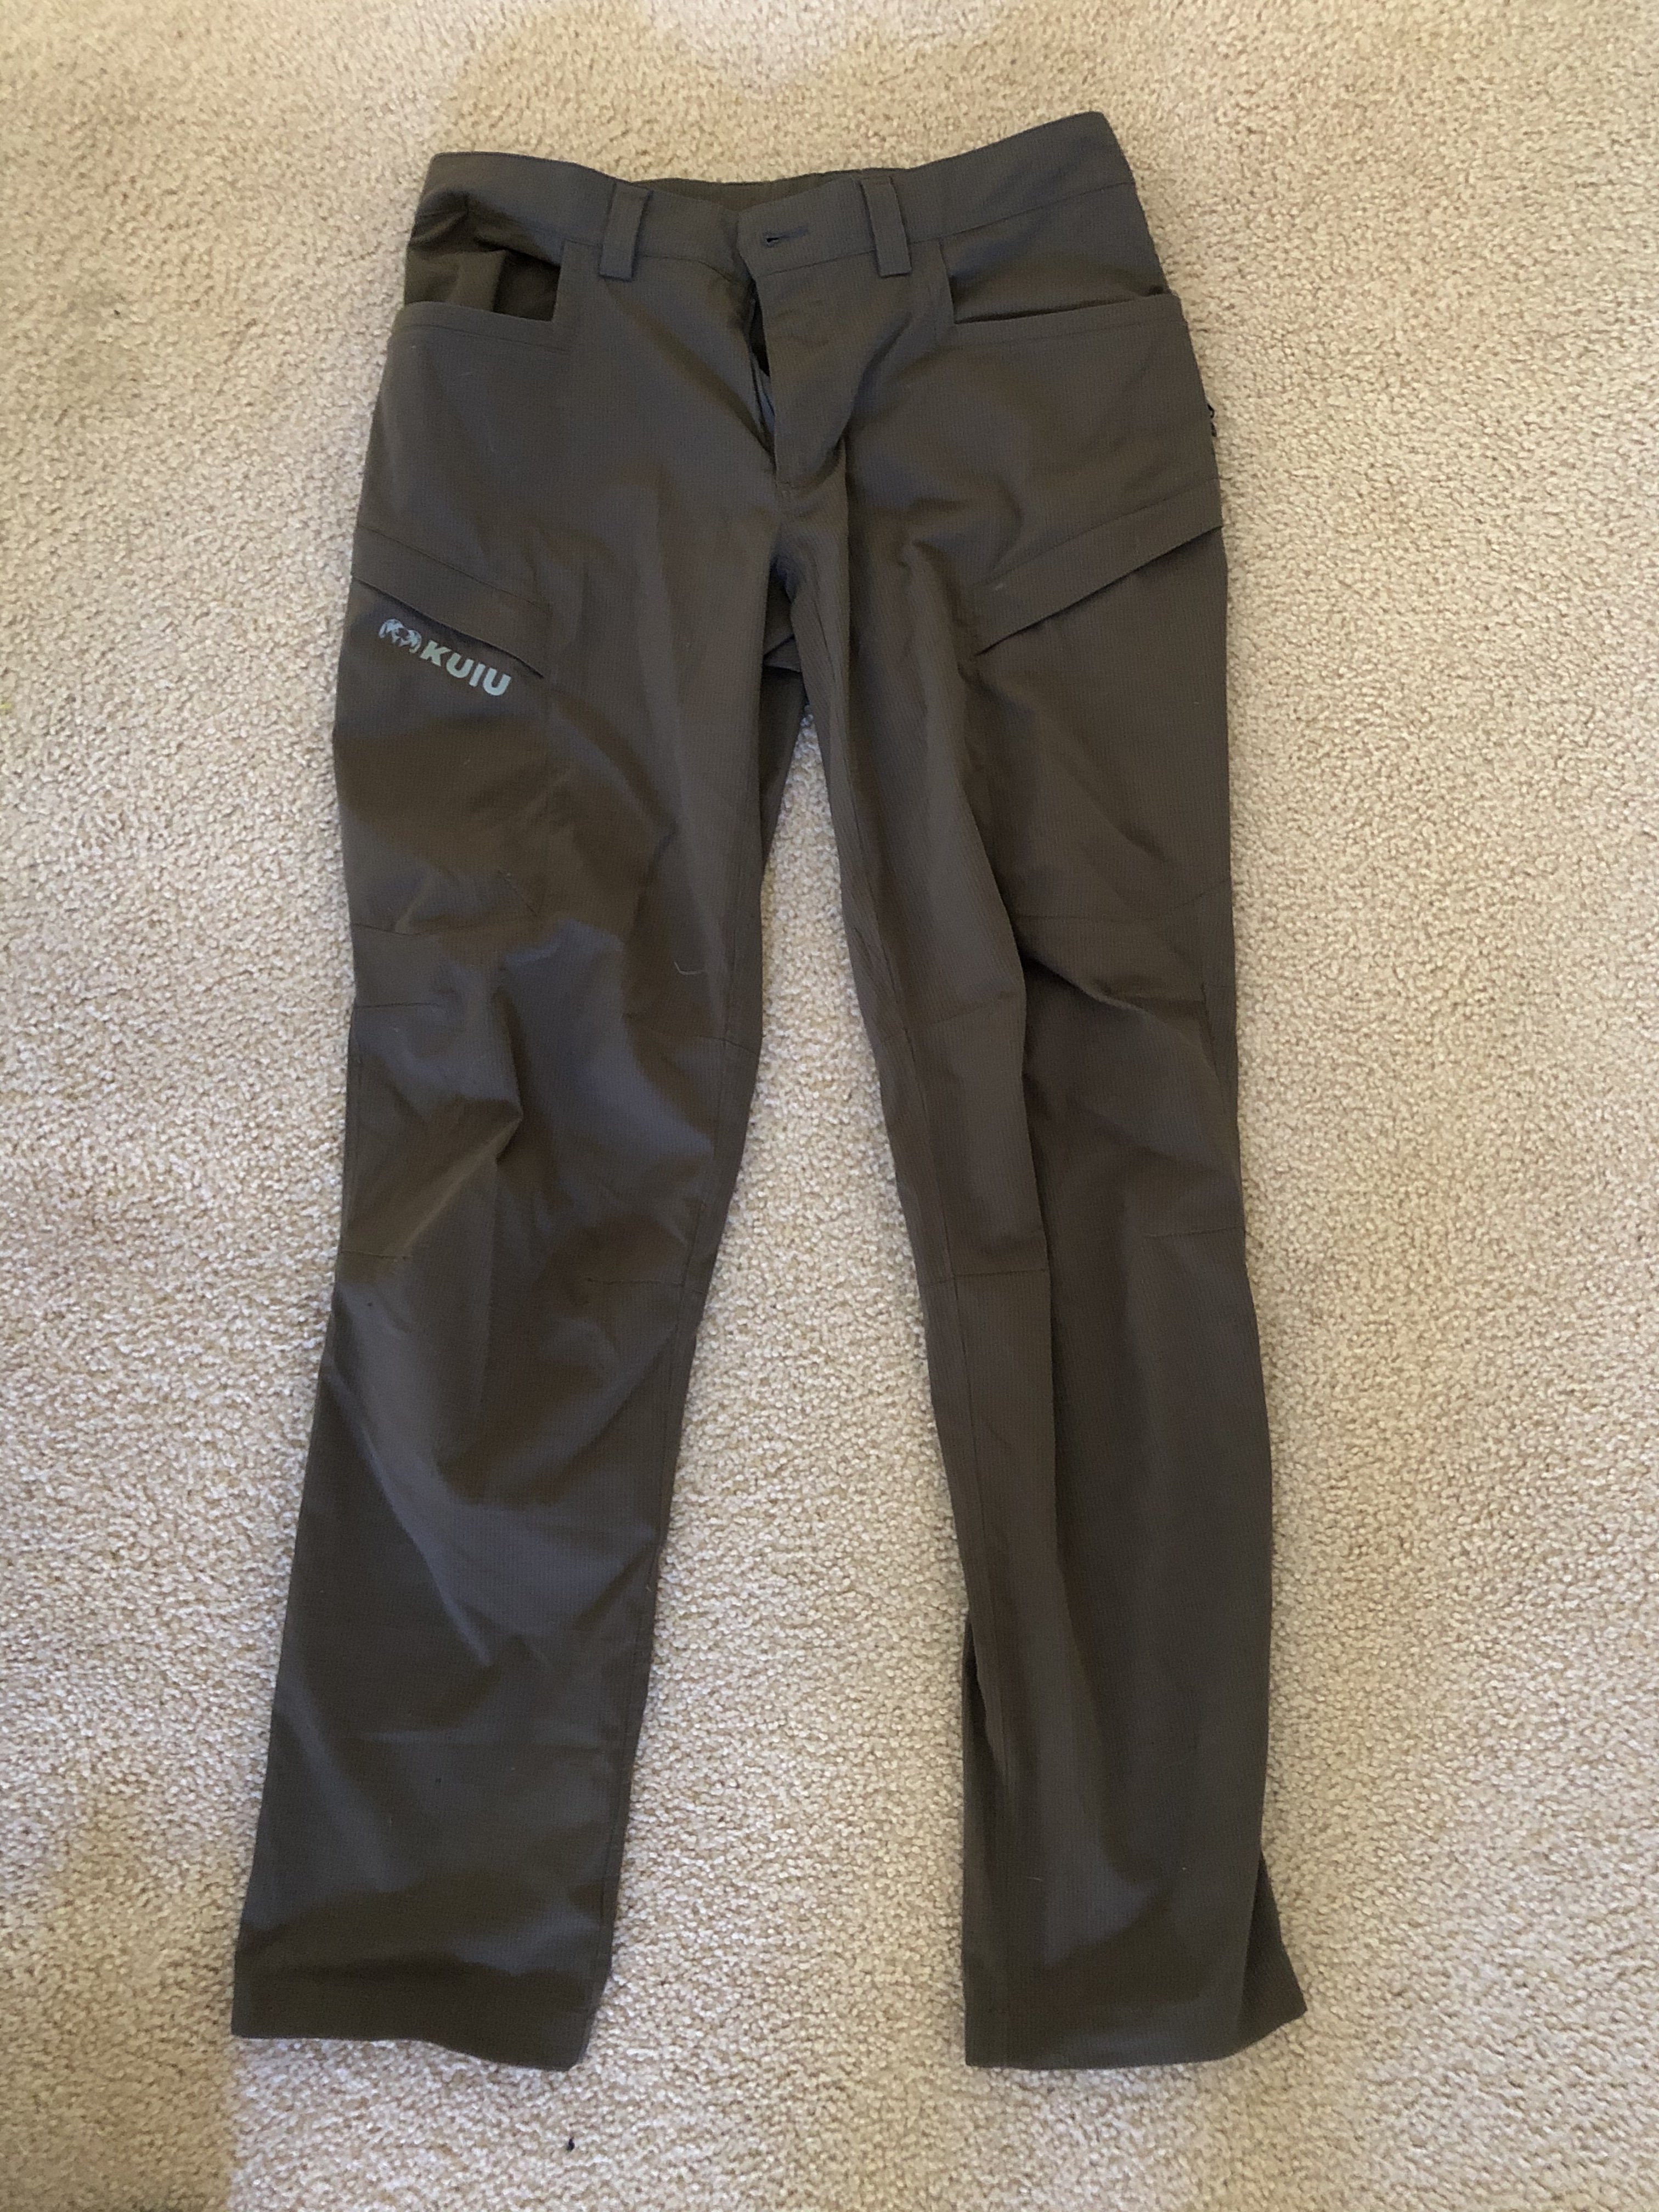 SKB case, Kuiu pants, Simple release - Classified Ads - CouesWhitetail ...